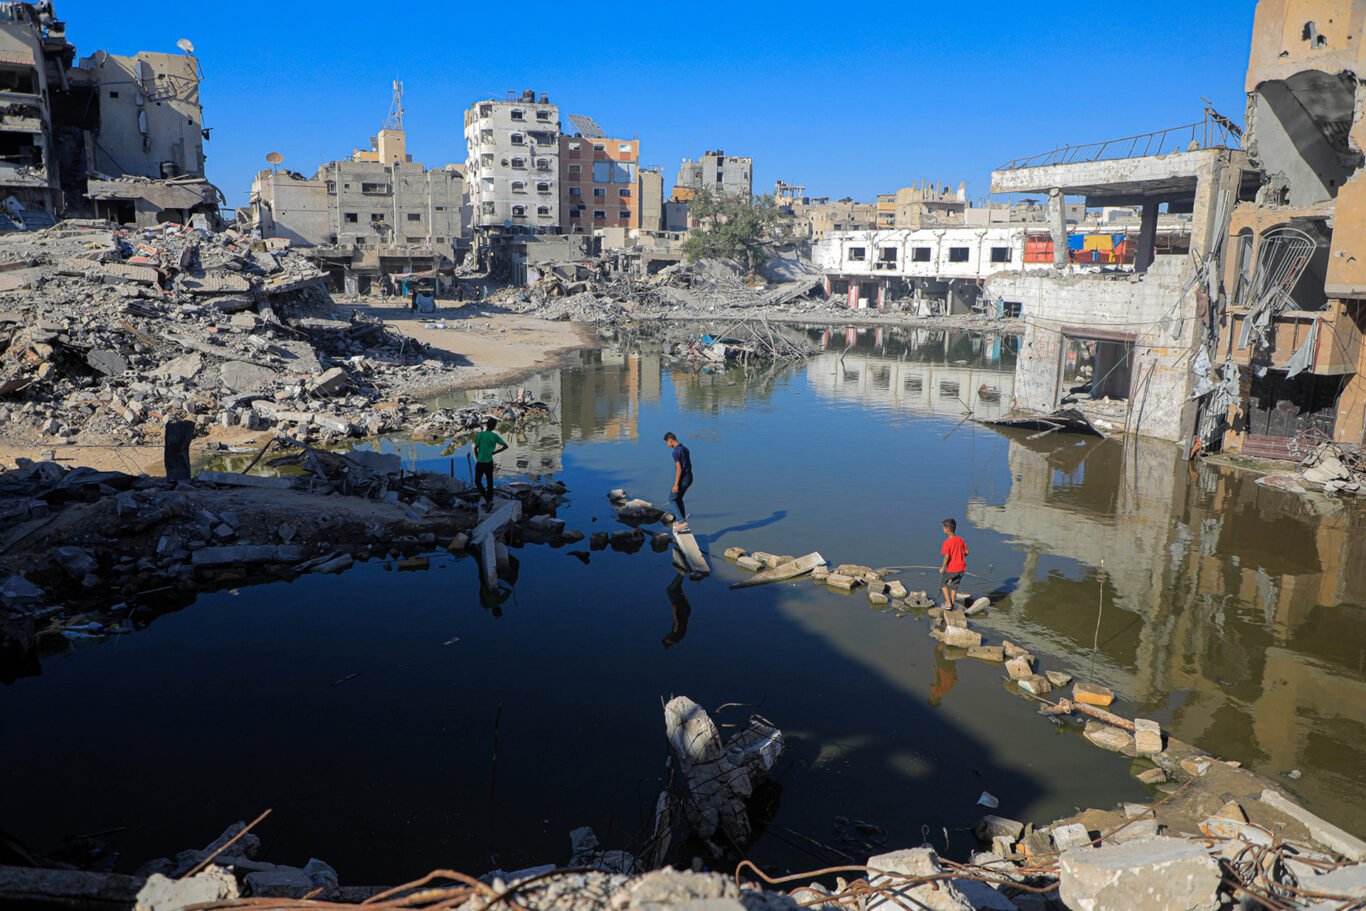 pedestrians cross ponds of wastewater in the city of Khan Younis in south Gaza as a result of the Israeli invasion that has decimated the enclave’s sewage system.